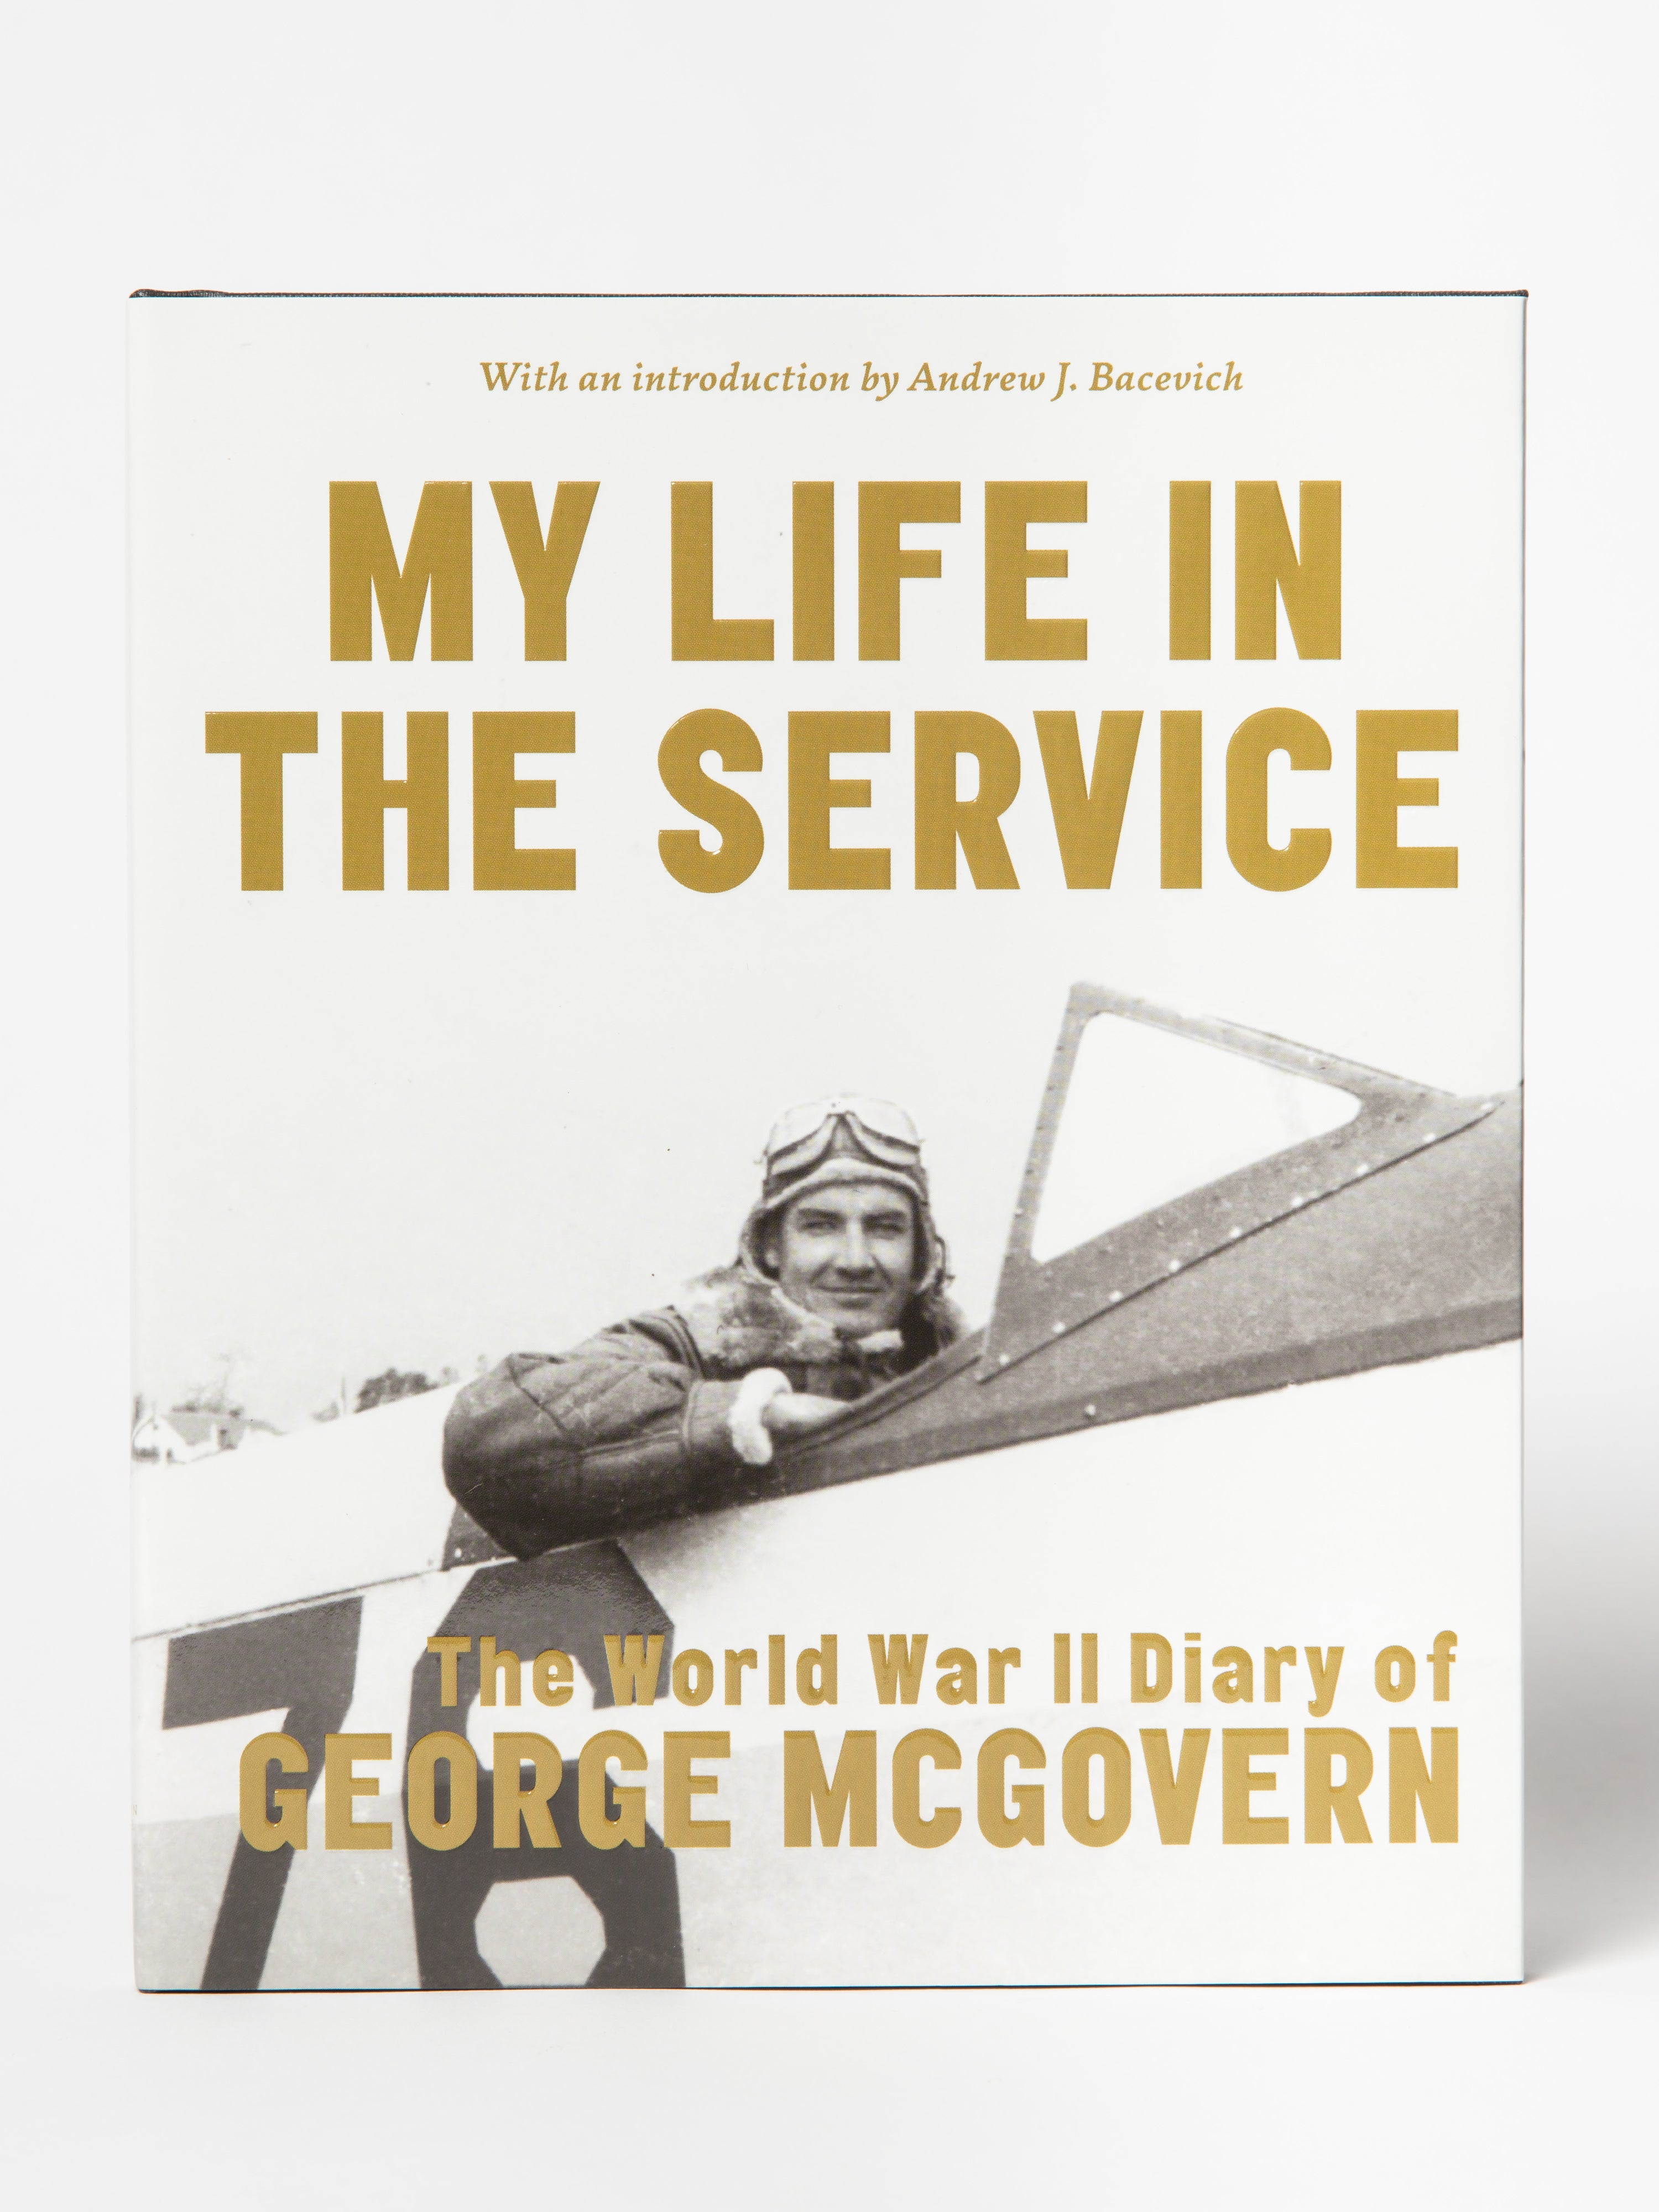 My Life In the Service: The World War II Diary of George McGovern